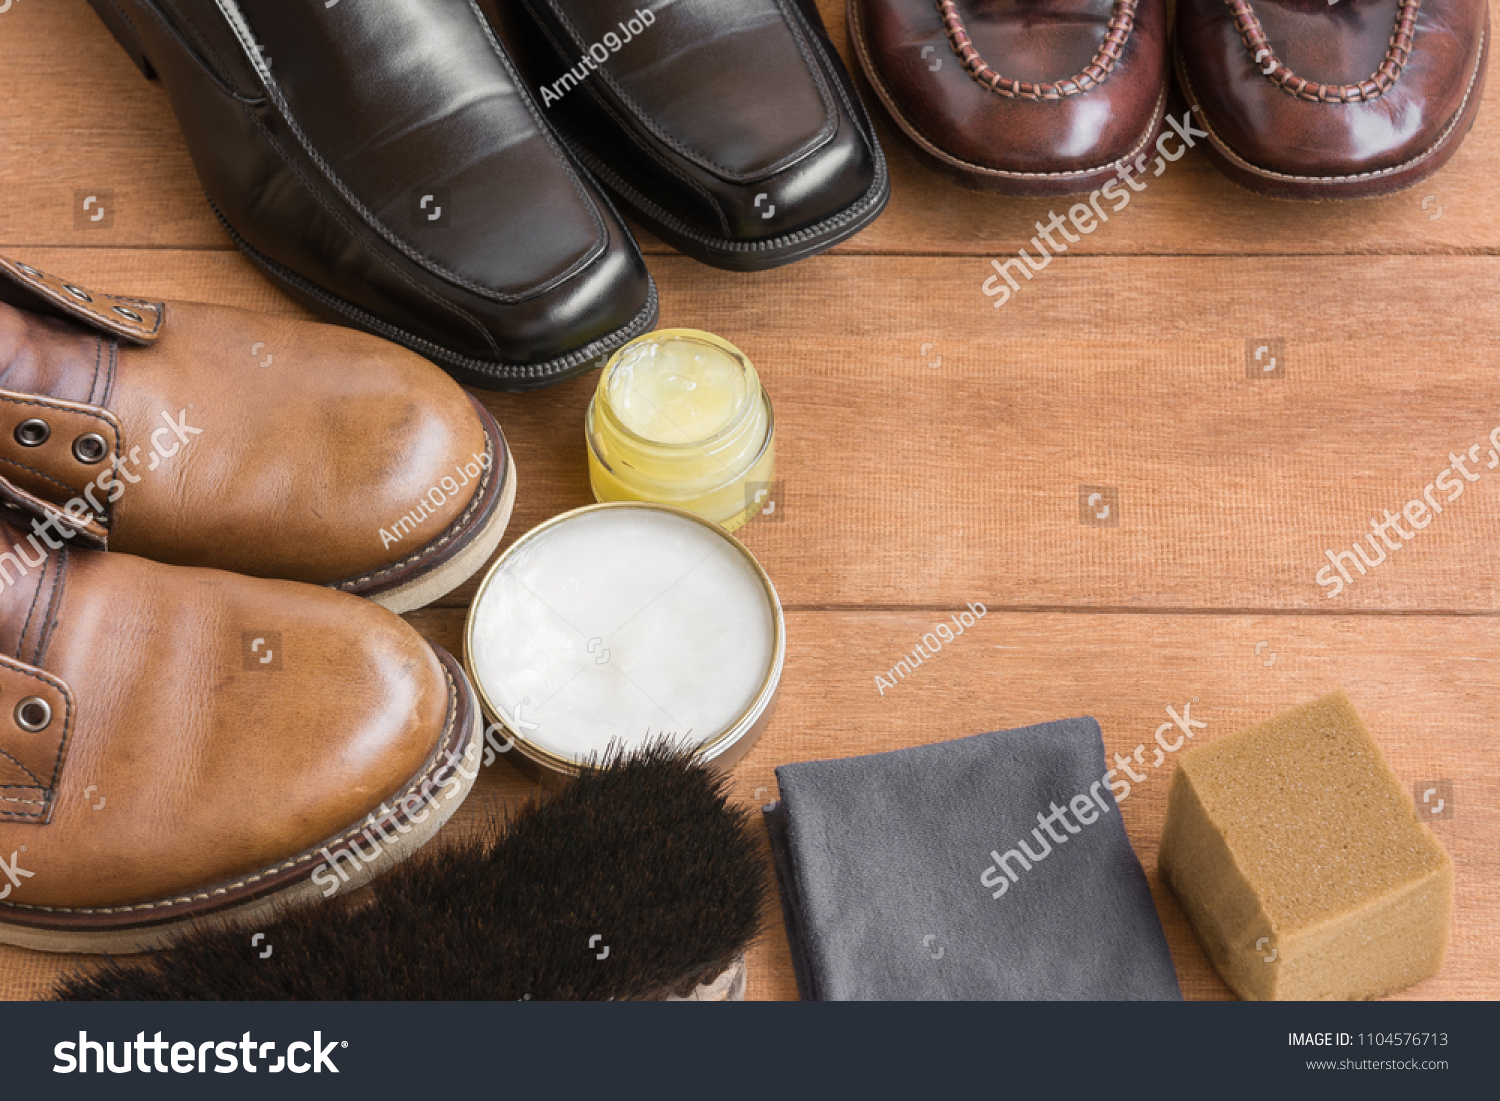 Old Leather Shoes On Wooden Stock Photo 